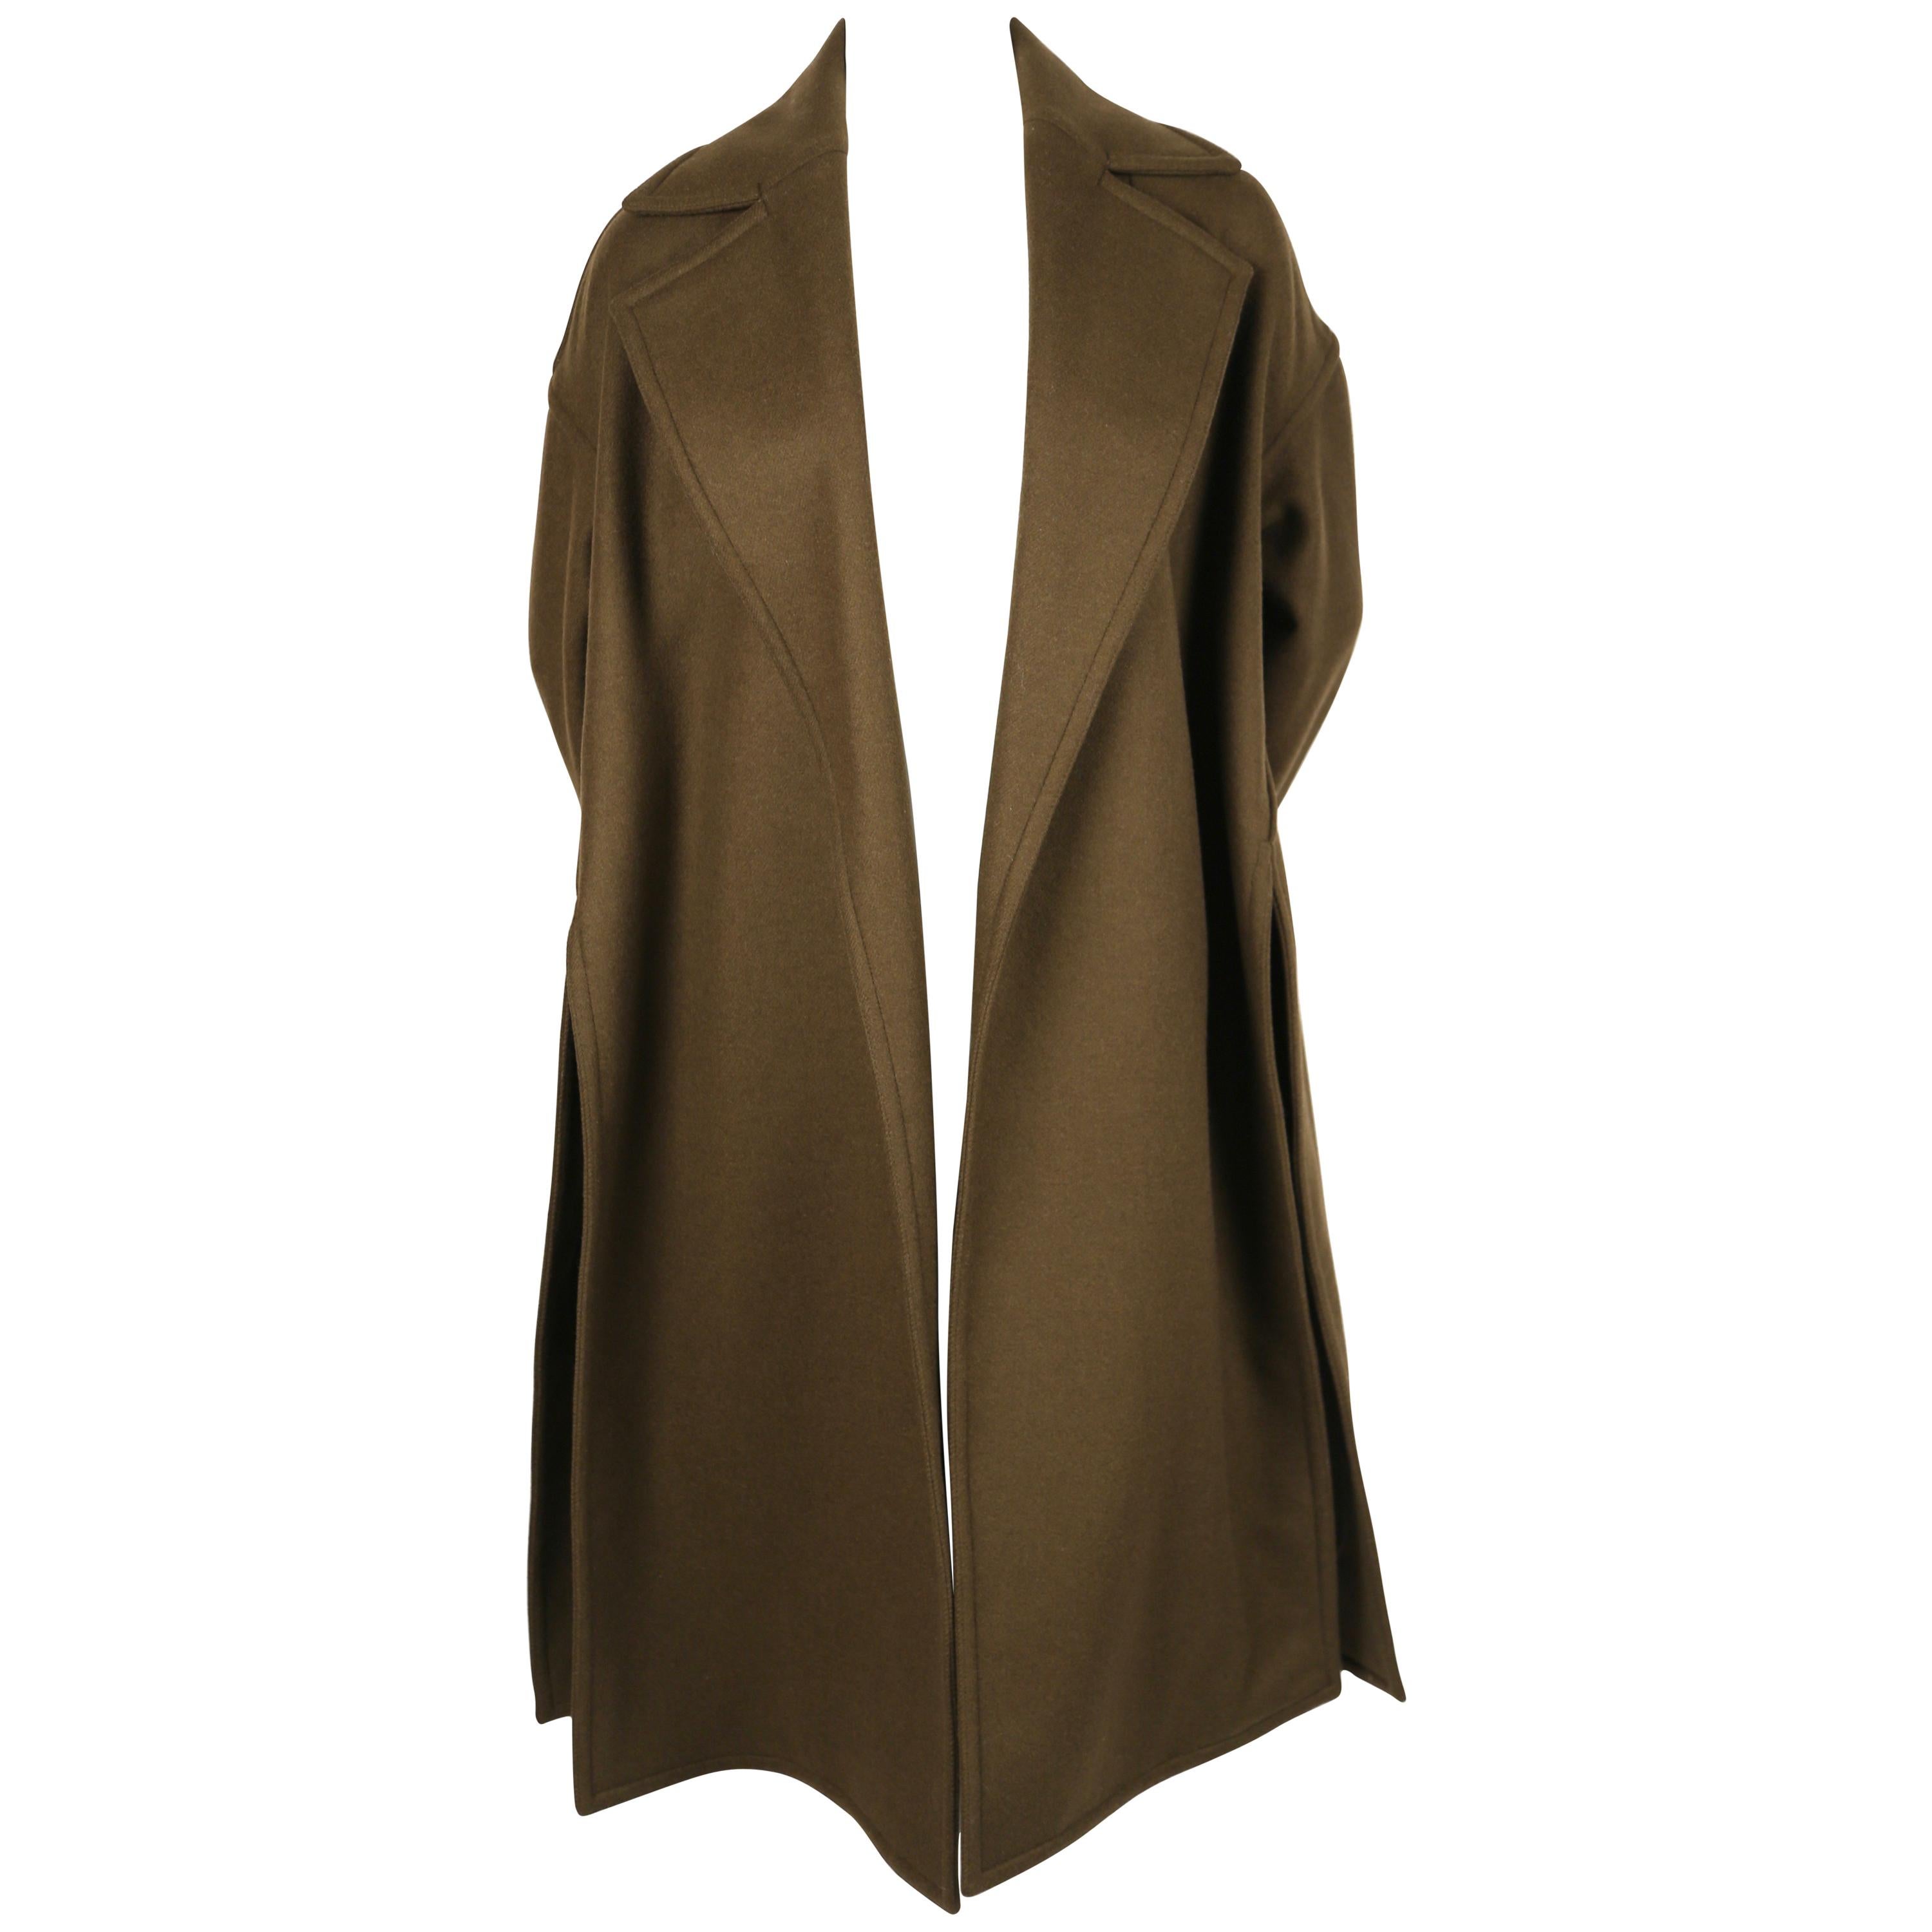 2015 CELINE By Phoebe Philo Khaki Wool Coat With Open Closure For Sale